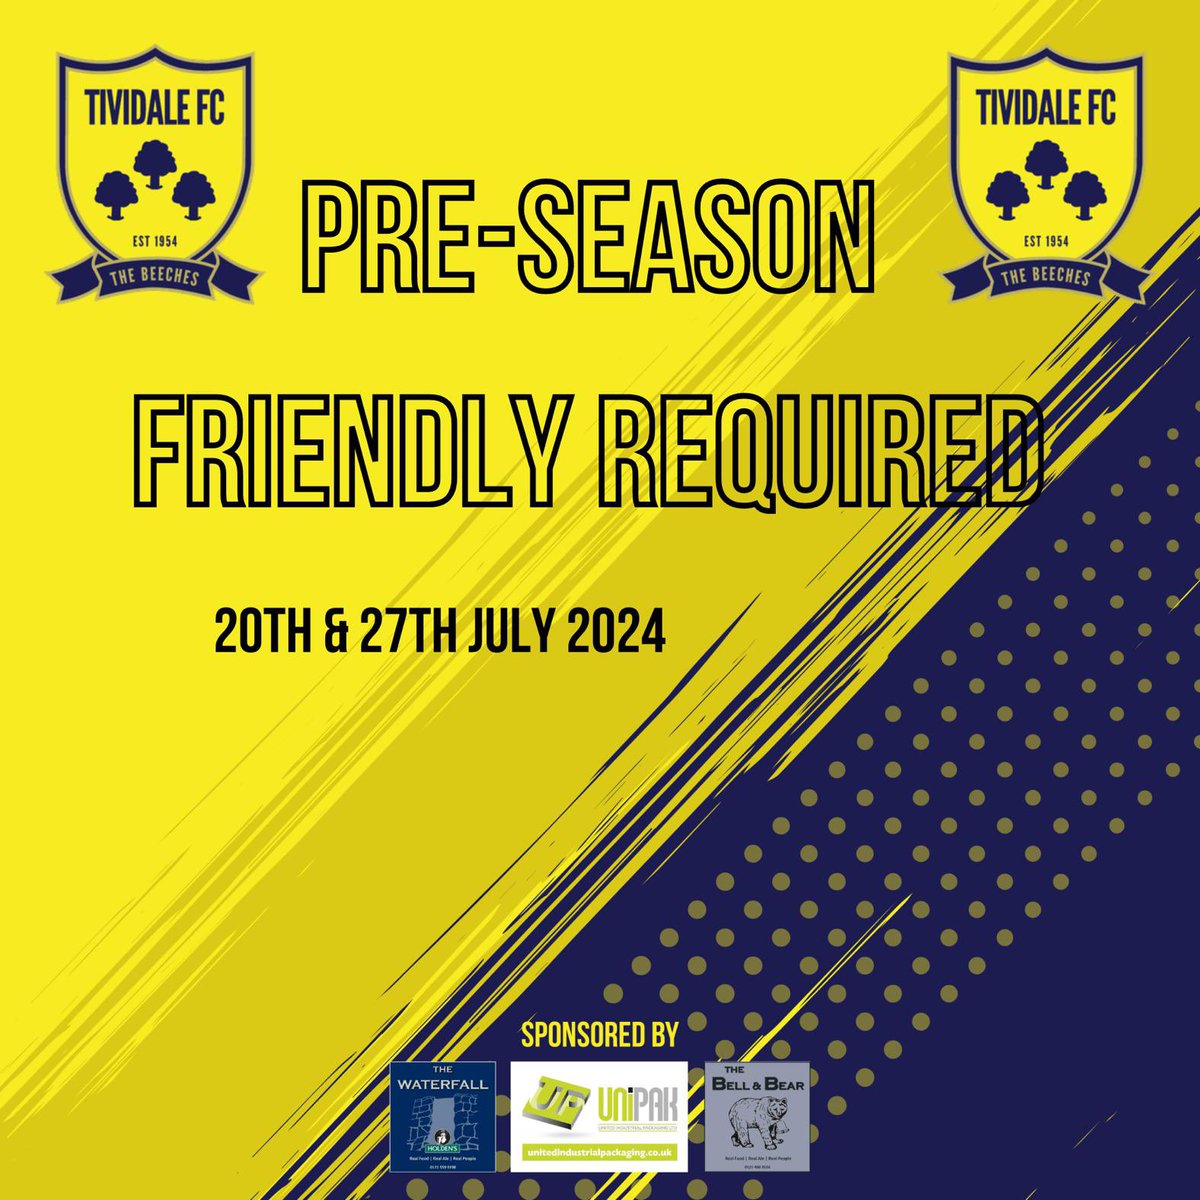 Pre-Season Friendlies Required! @TiviFCofficial are looking to arrange pre season games with clubs from step 4/5/6 on both the 20th & 27th July to complete our pre season schedule! Away fixtures are preferred however we can host! Please DM if interested